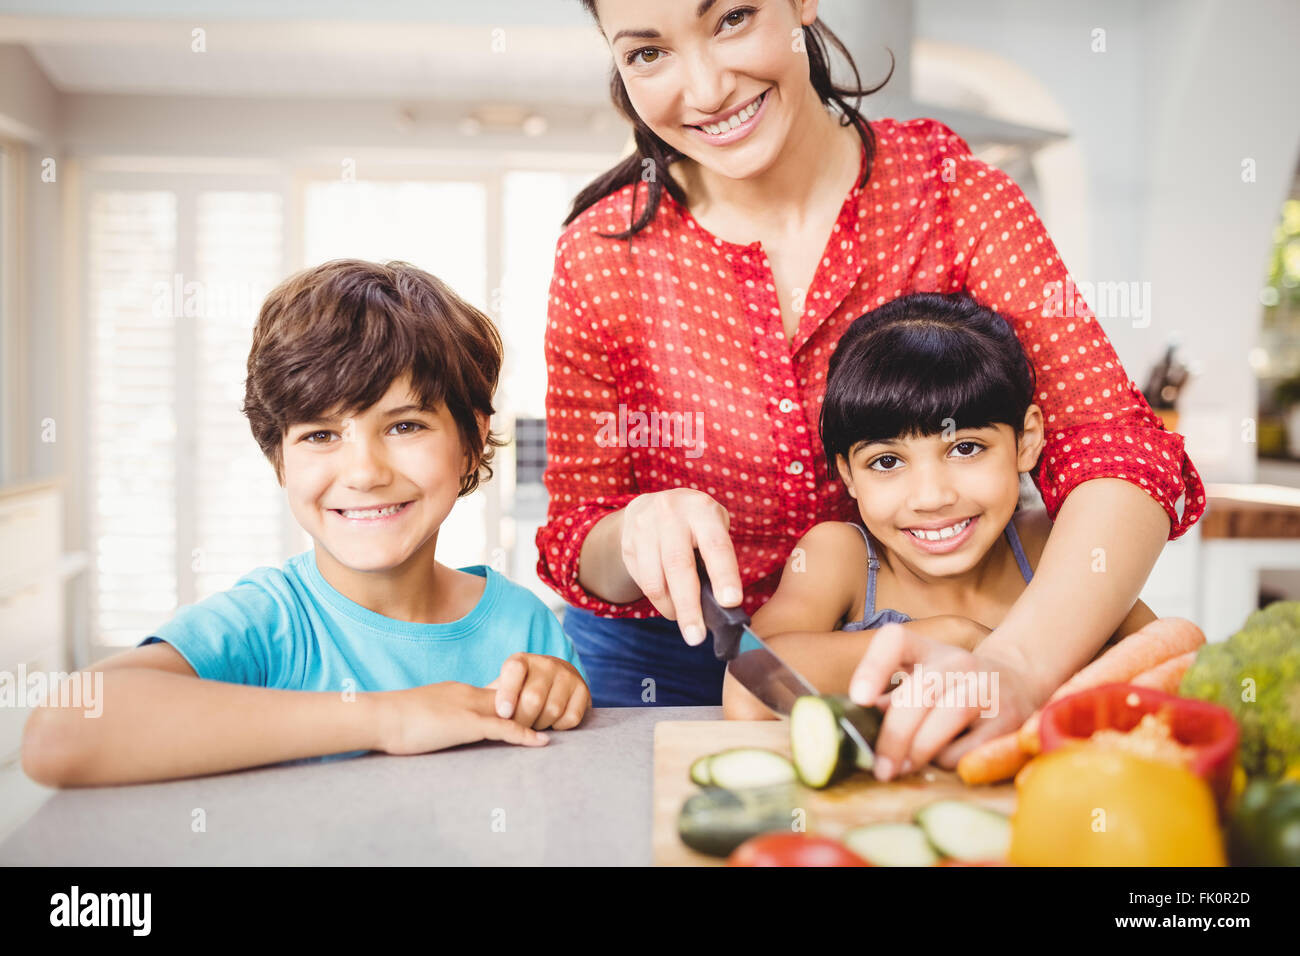 Happy woman with children chopping vegetables at home Stock Photo